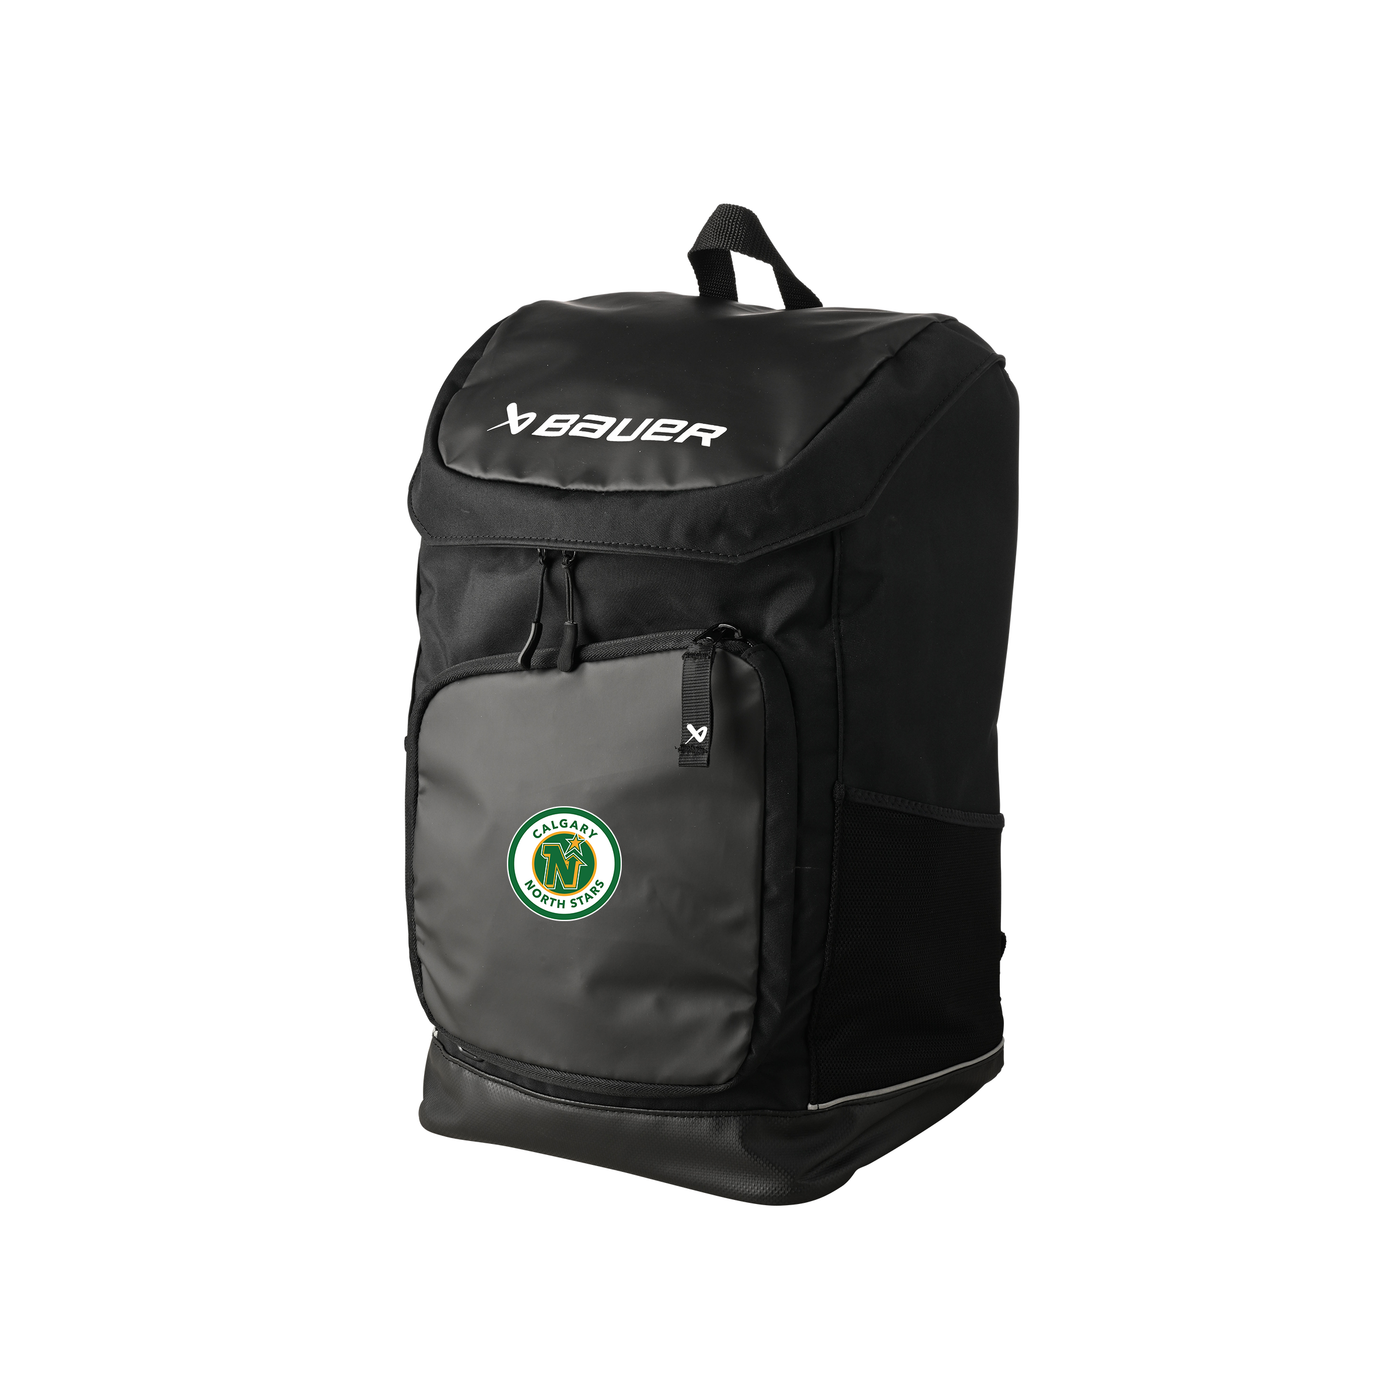 Bauer Pro Backpack - NS